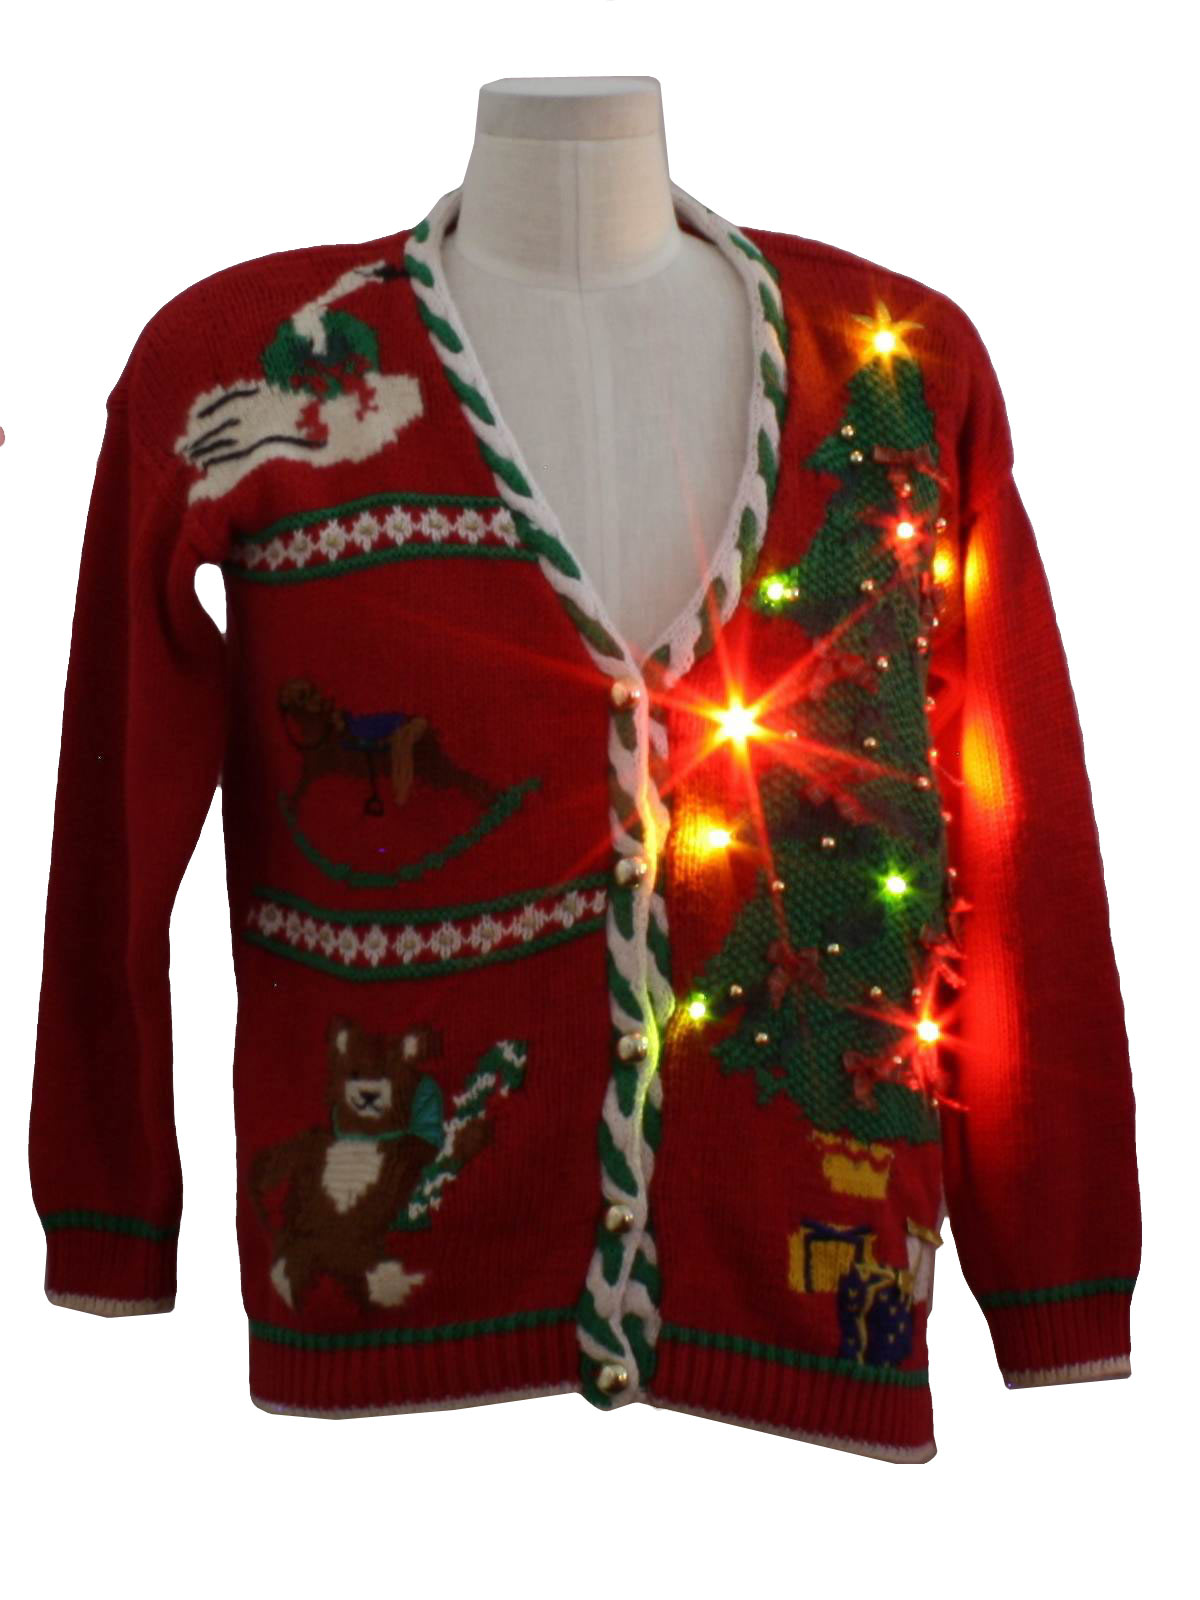 ... Nordstrom Town Square Unisex Lightup Ugly Christmas Cardigan Sweater